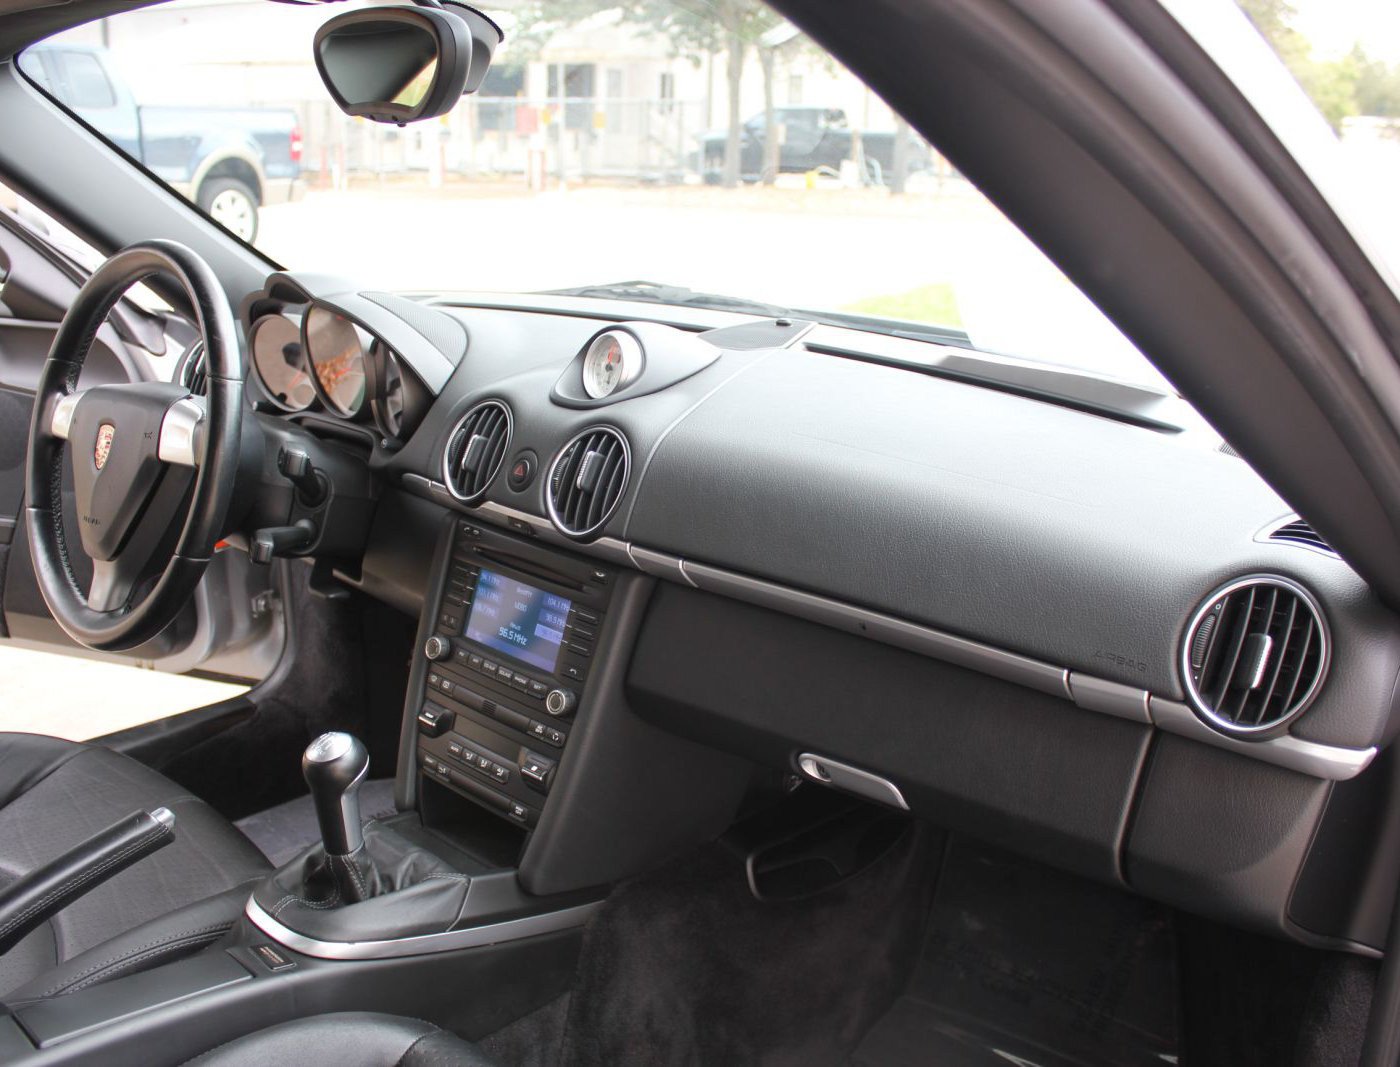 Sample picture of the interior of a 2012 Porsche Boxter Spider